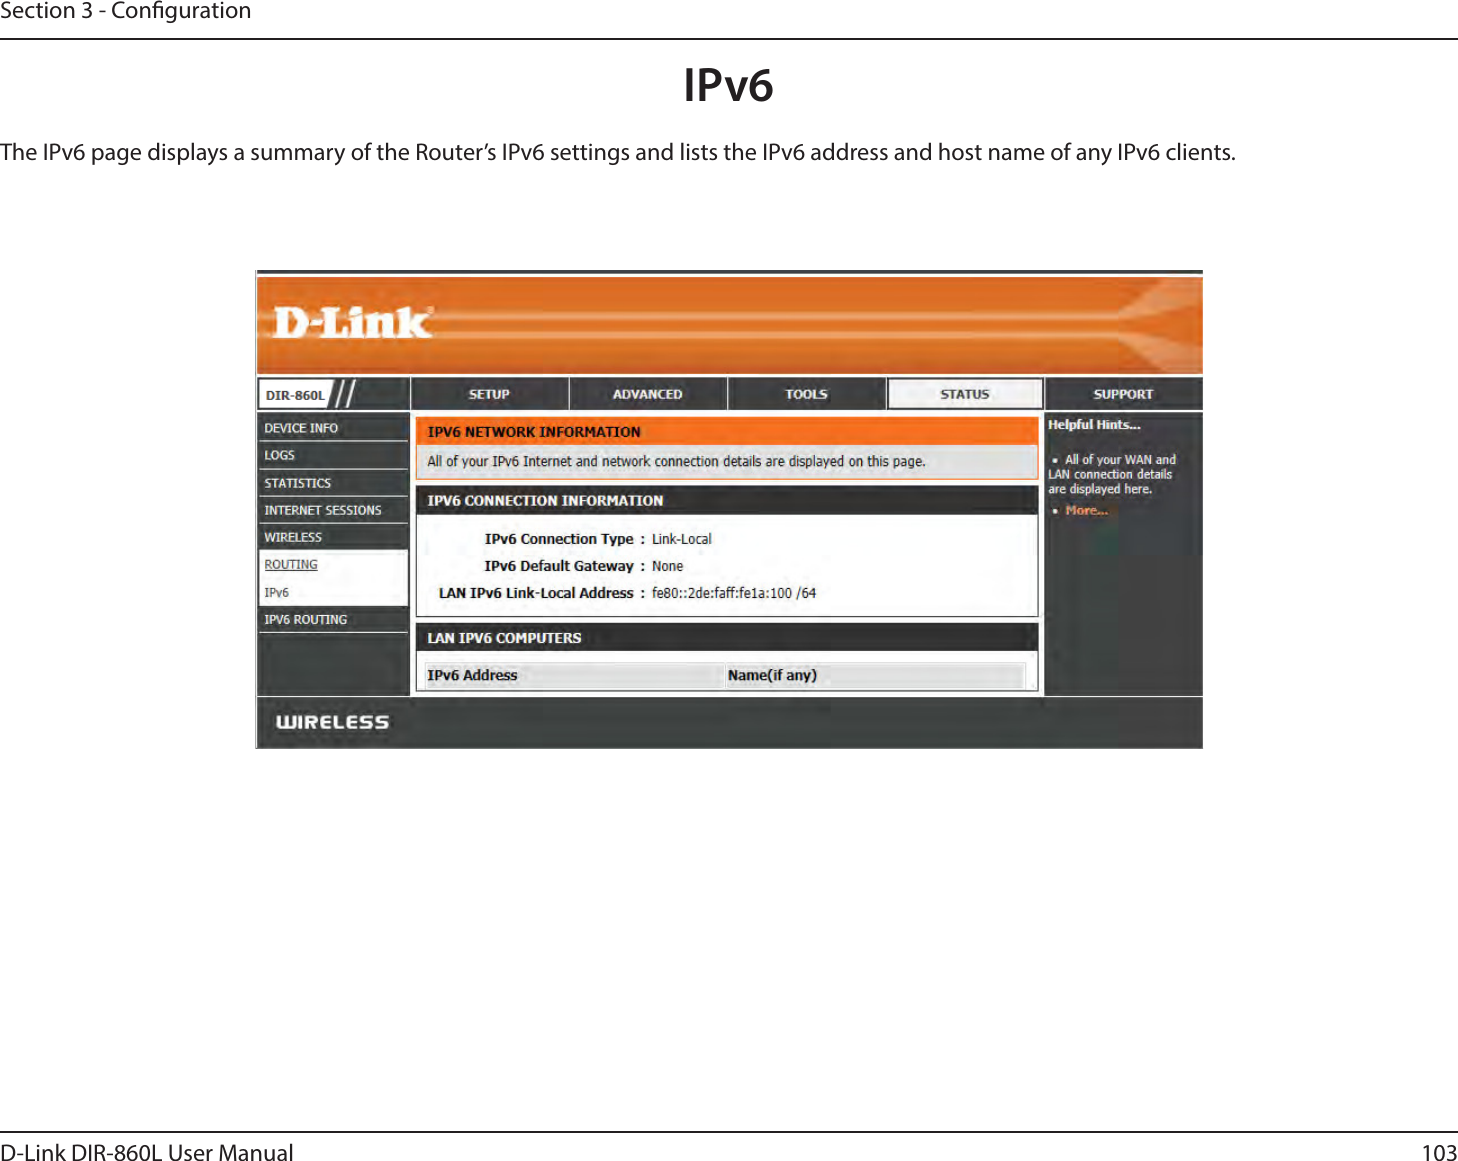 103D-Link DIR-860L User ManualSection 3 - CongurationIPv6The IPv6 page displays a summary of the Router’s IPv6 settings and lists the IPv6 address and host name of any IPv6 clients. 